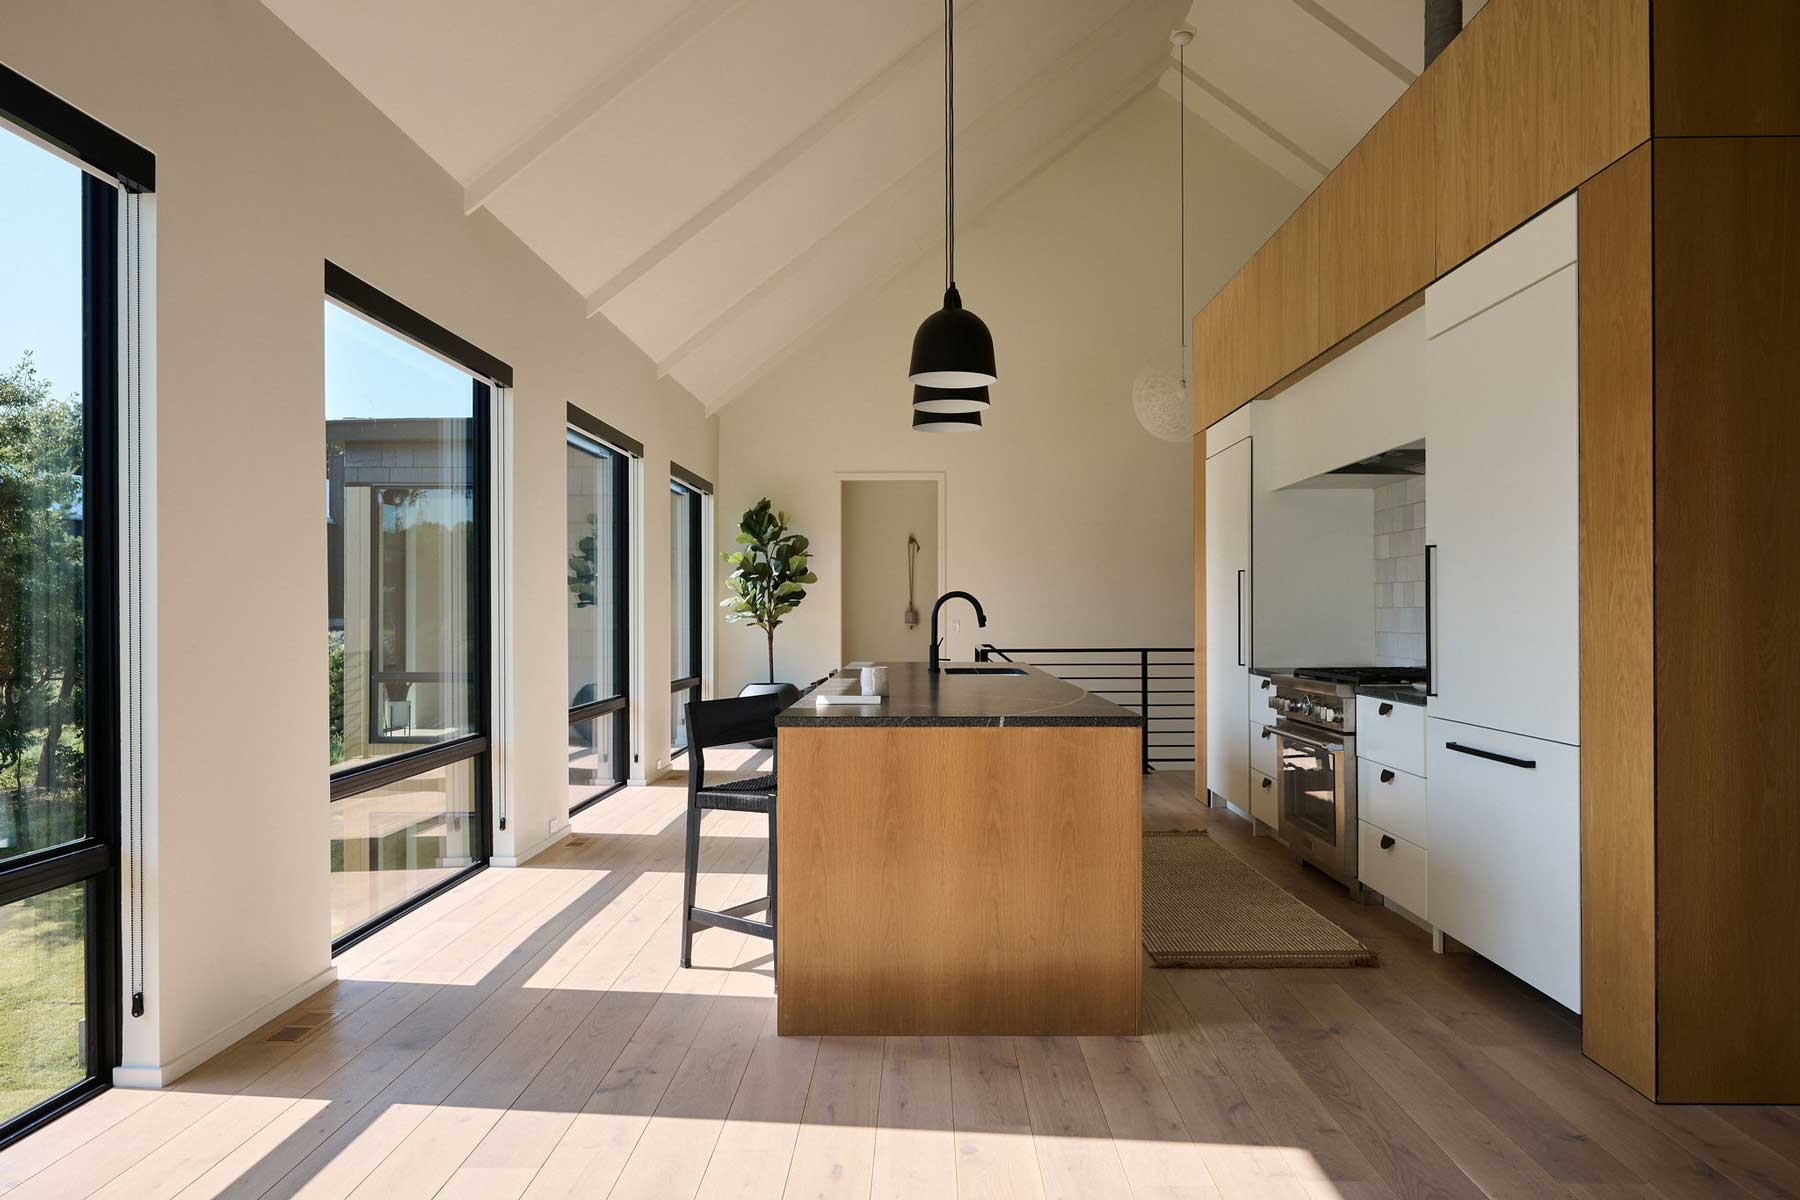 A modern kitchen centered around a white oak "cube" or a modern take on a scullery, with Marvin Essential Direct Glaze windows bringing in lots of natural light.